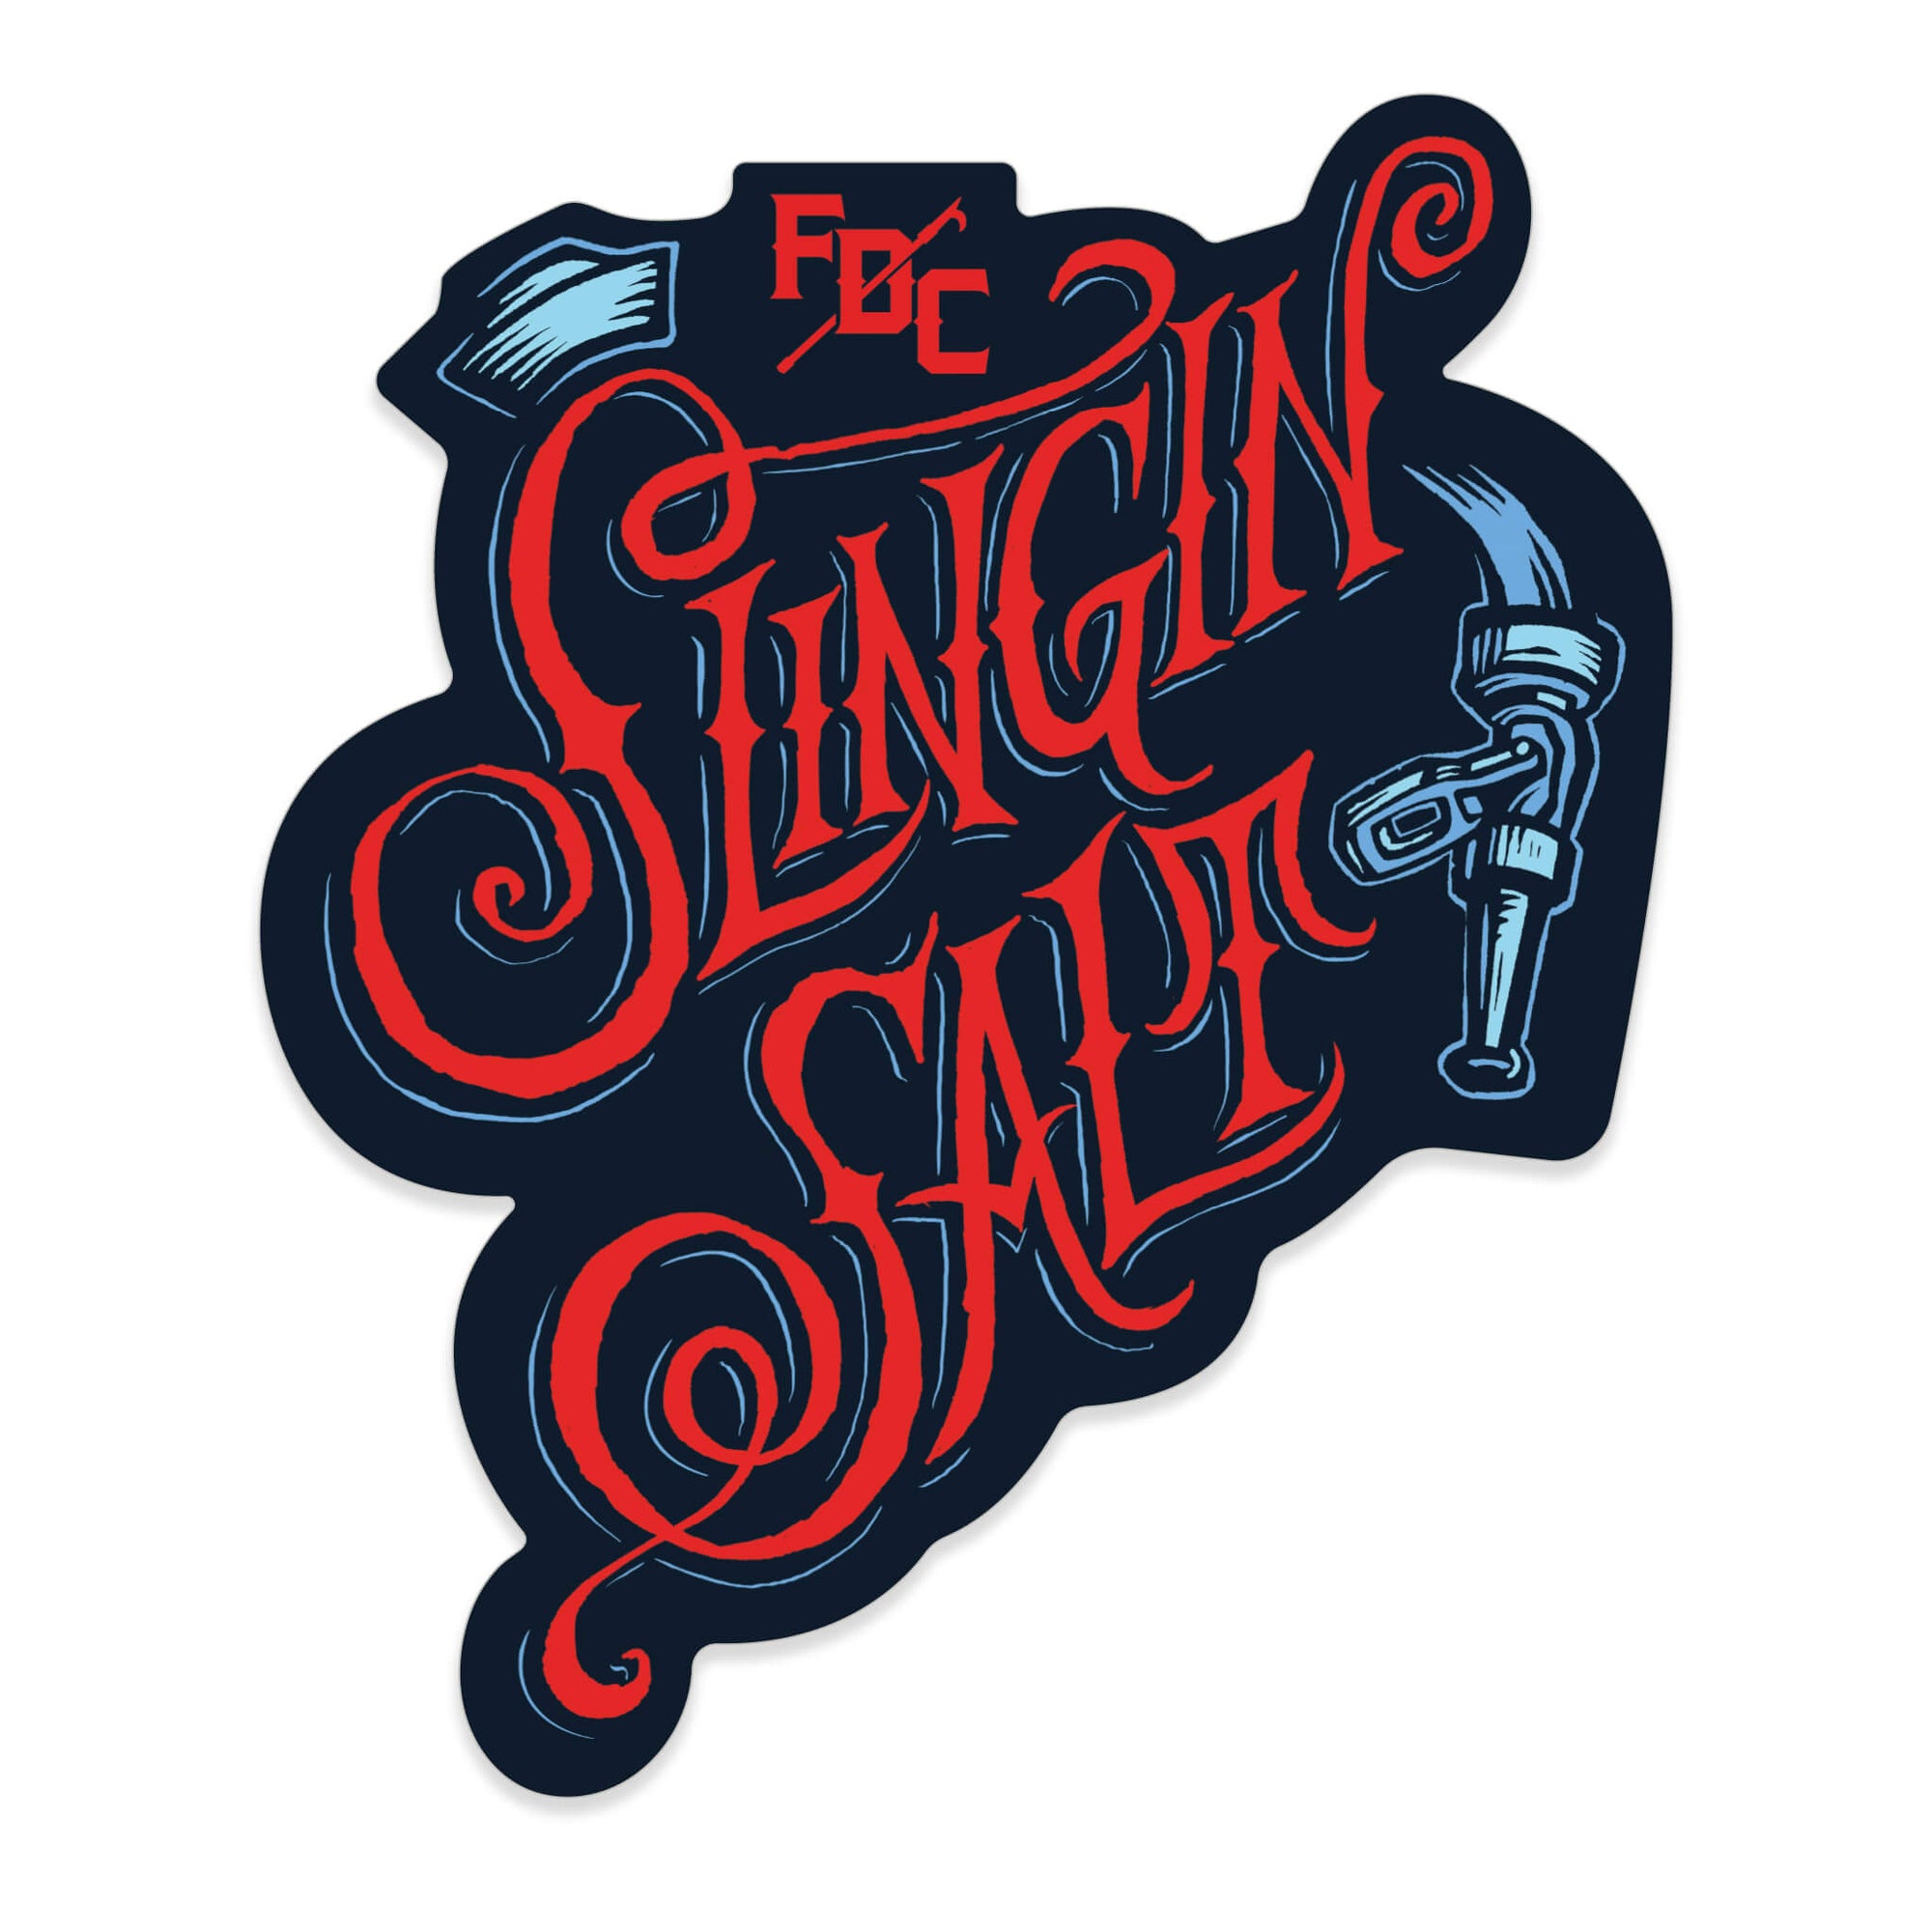 A sticker with the text "Slingin Salt" in red with the red FDC pike pole logo above. The text has a sailor hat on the "S" and a hose on the right of the text.